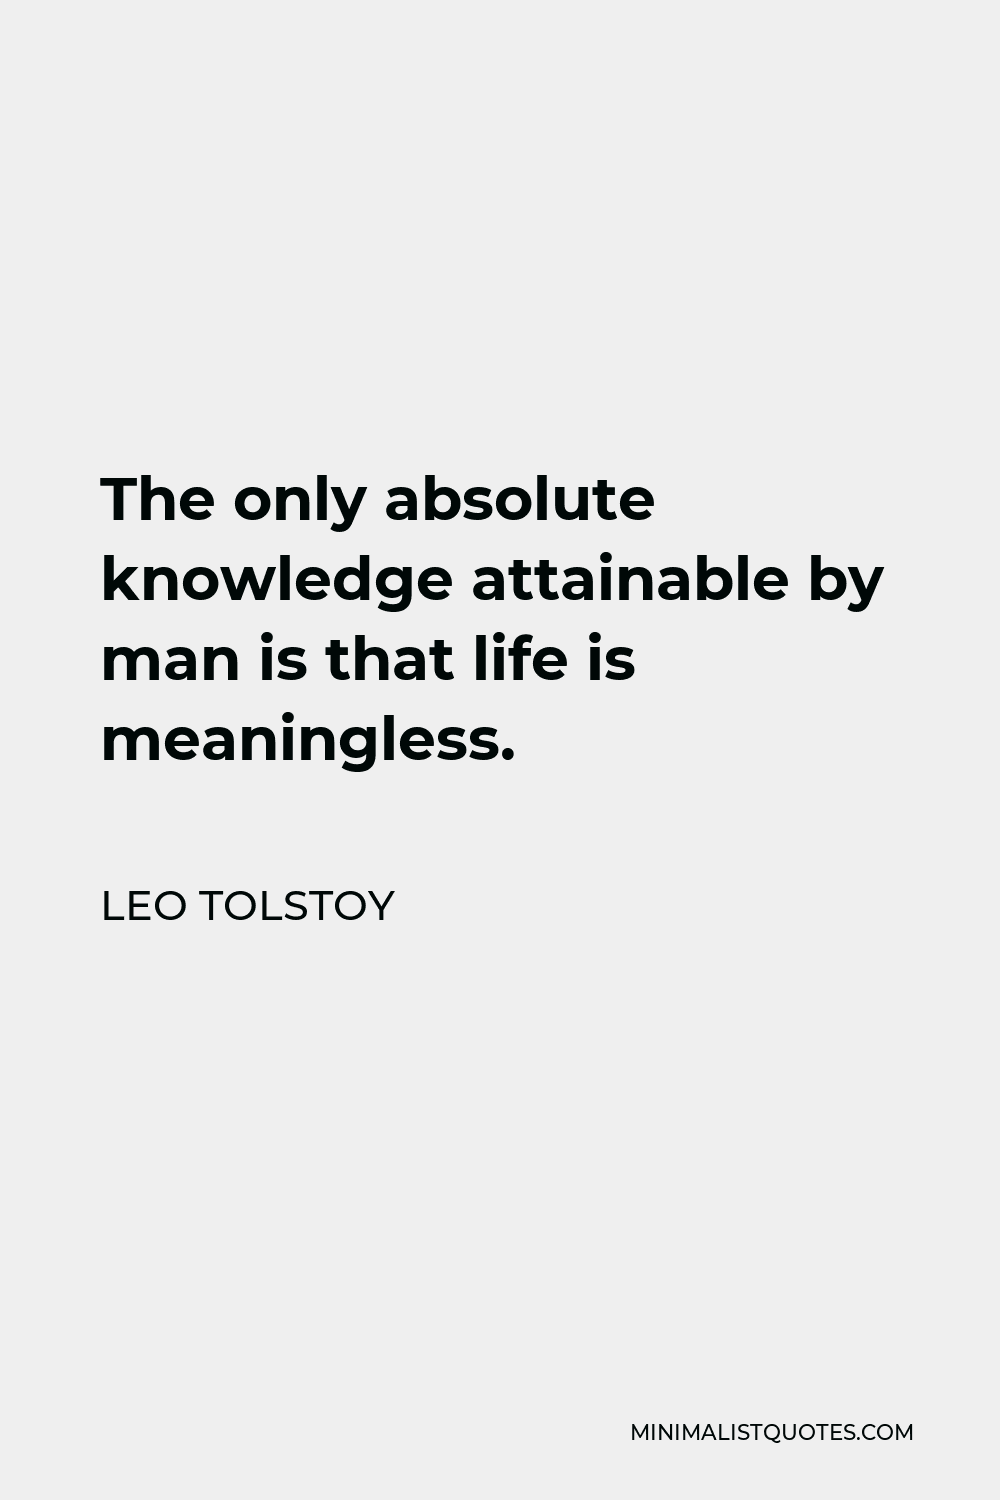 Leo Tolstoy Quote - The only absolute knowledge attainable by man is that life is meaningless.